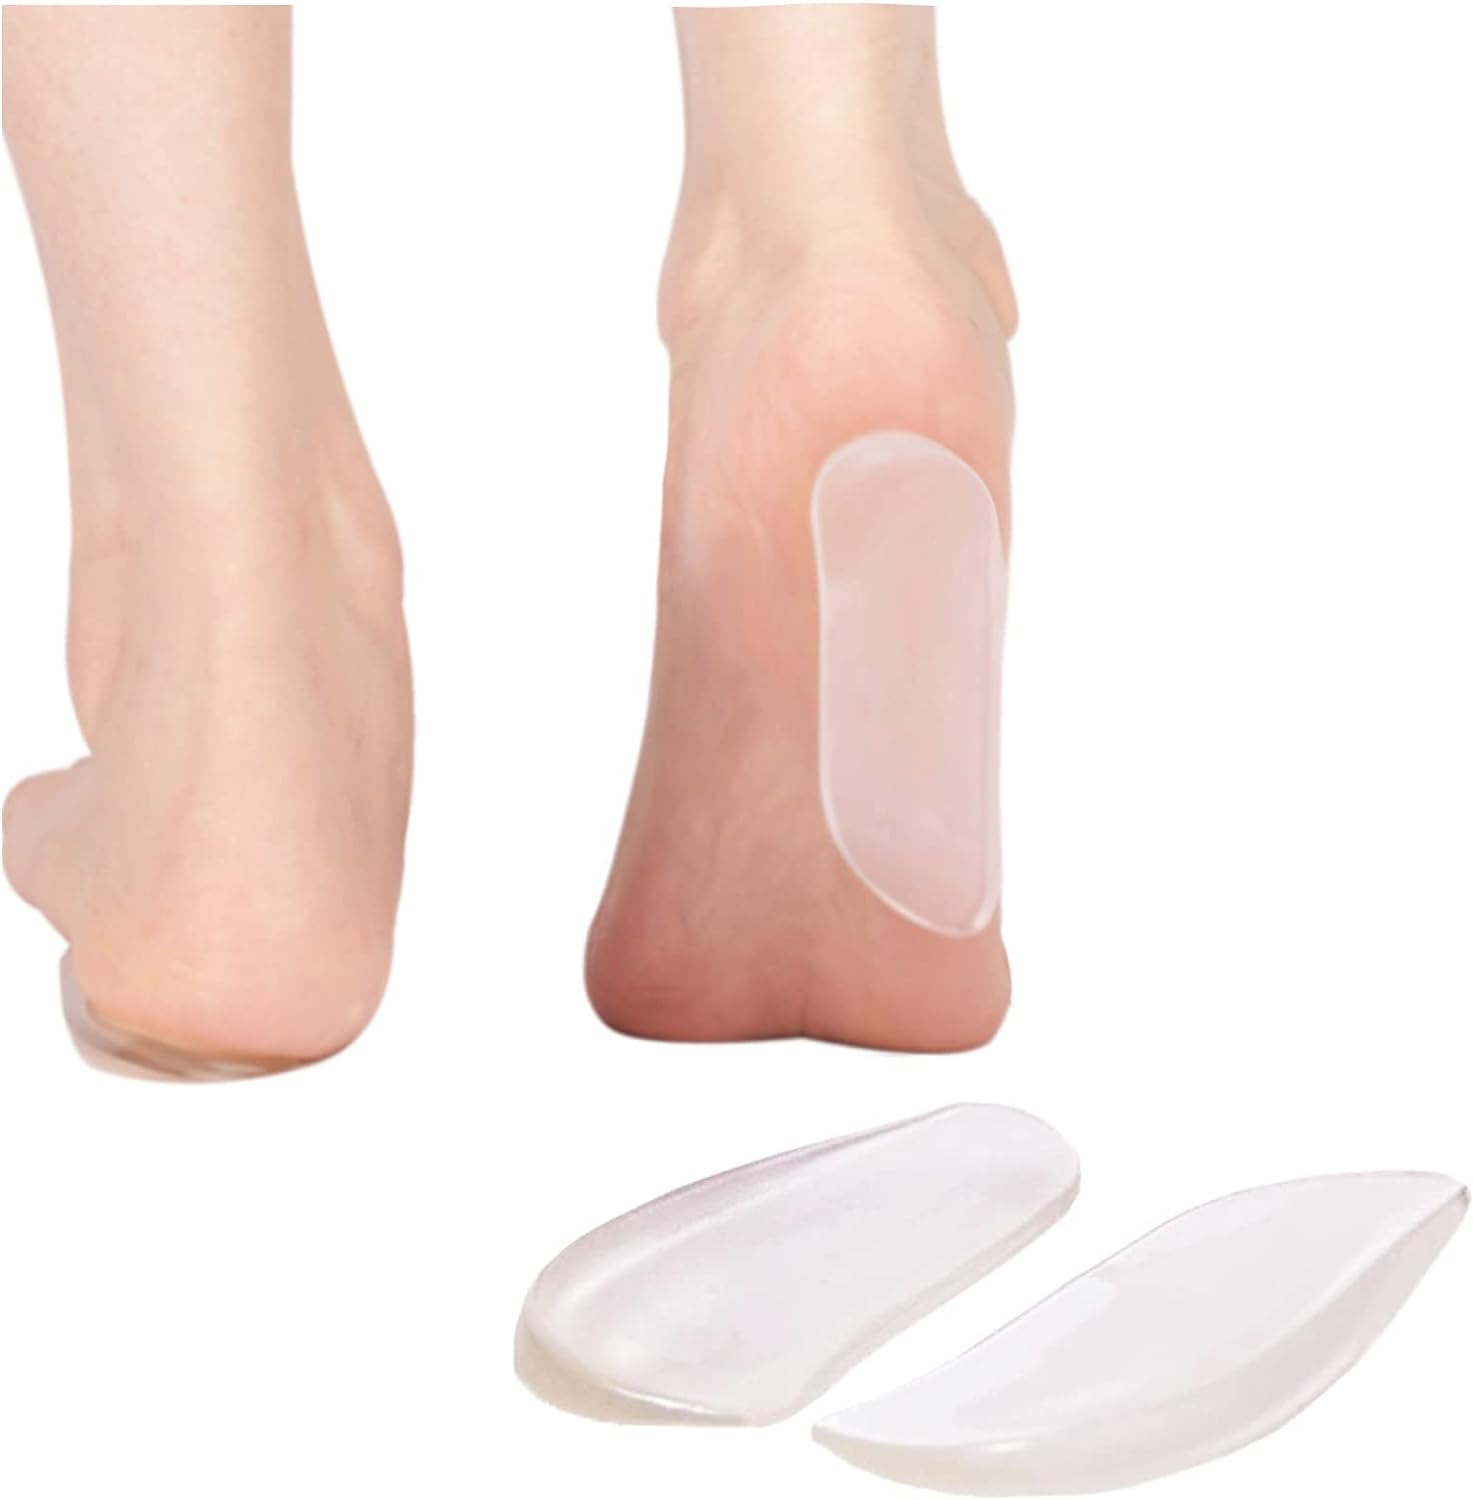 2 Pairs Medial Lateral Heel Wedge Inserts for Men and Women, Orthopedic Supination Pronation Insoles for Knock Knee Pain Osteoarthritis O/X Type Leg Corrective